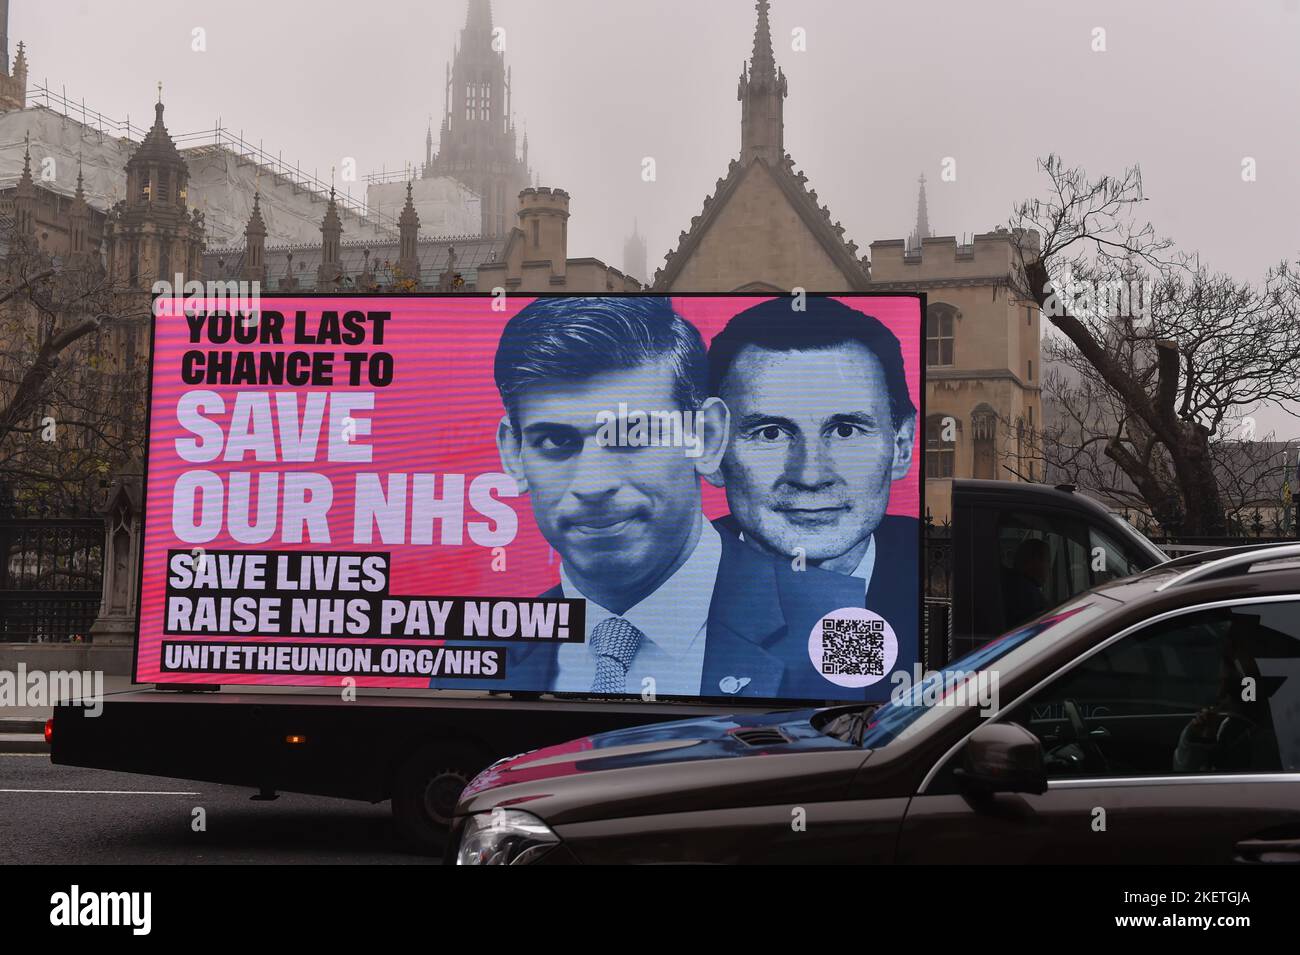 London, 14th Nov 2022. A van carries a digital billboard with a picture of Prime Minister Rishi Sunak and Chancellor Jeremy Hunt by Unite The Union, which reads Save Our NHS, seen near Houses Of Parliament. Credit: Thomas Krych/Alamy Live News Stock Photo